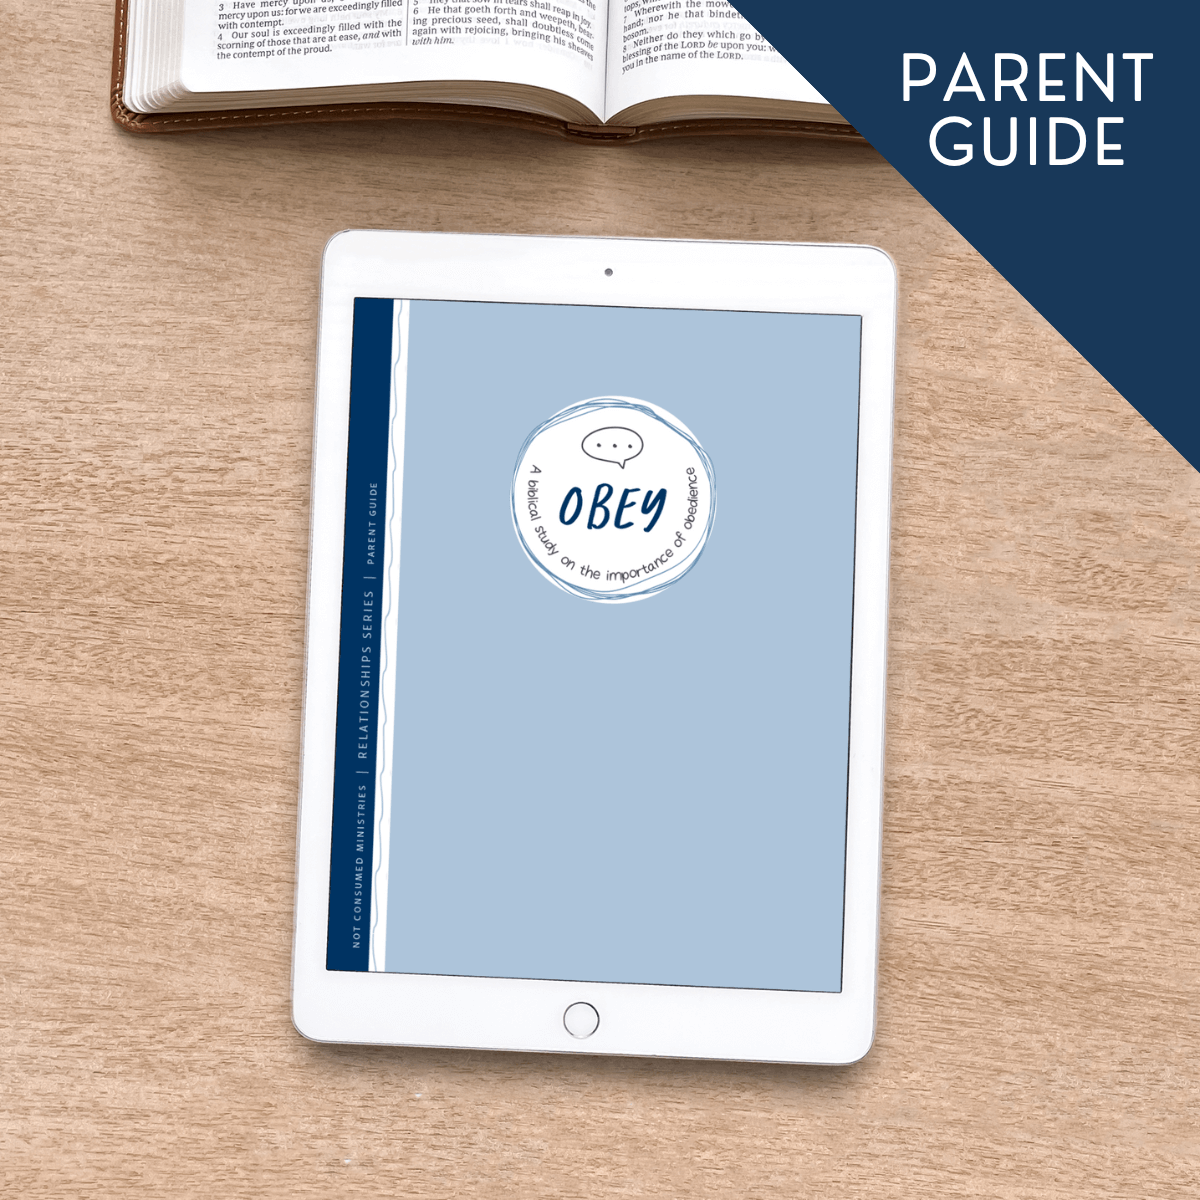 Obey Digital Printable Bible Study parent guide